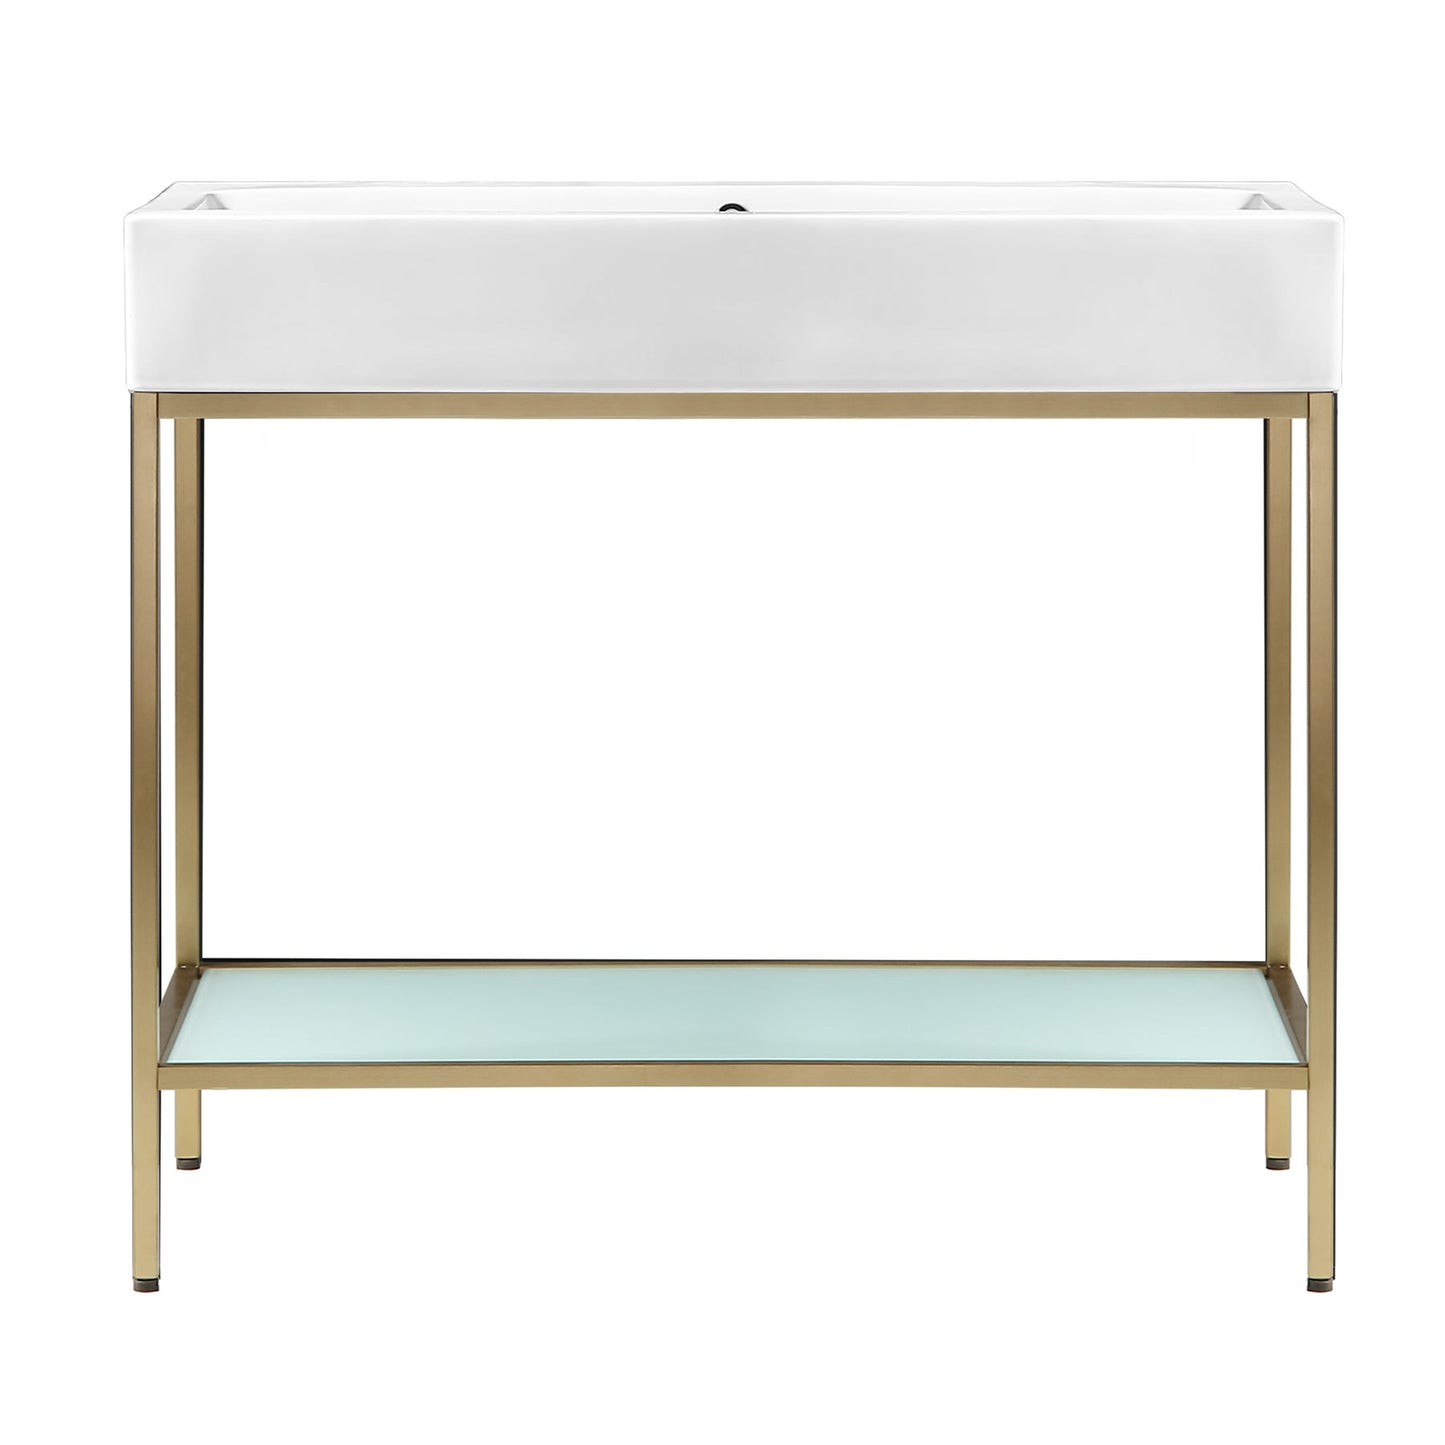 Swiss Madison Pierre 40" x 34" Freestanding White Bathroom Vanity With Ceramic Single Sink and Gold Metal Frame